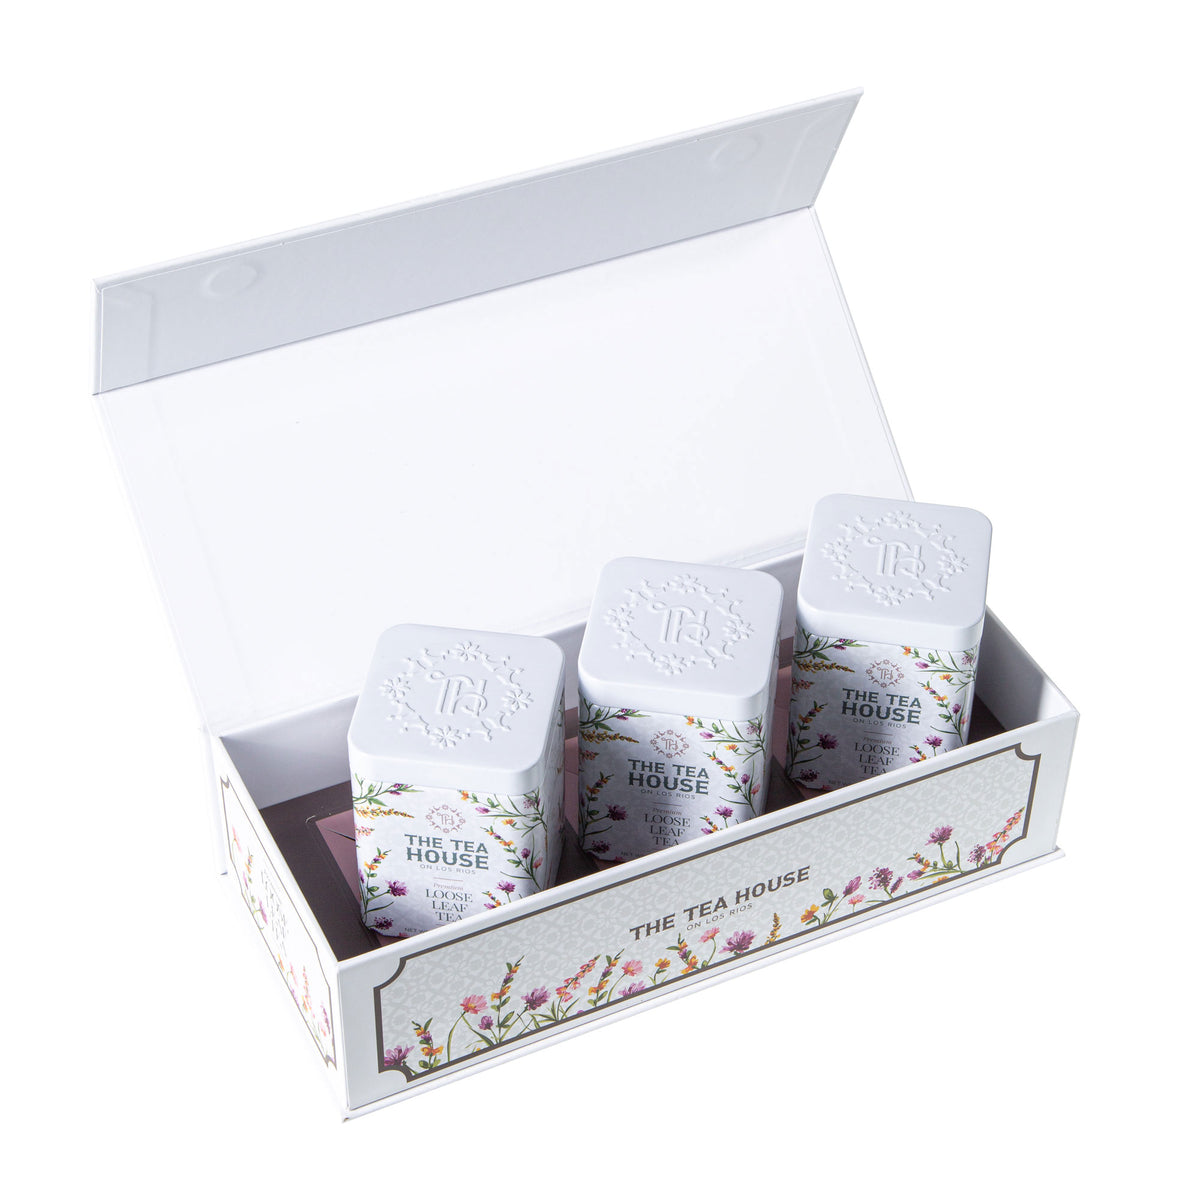 The Tea House Gift Box - Best Sellers